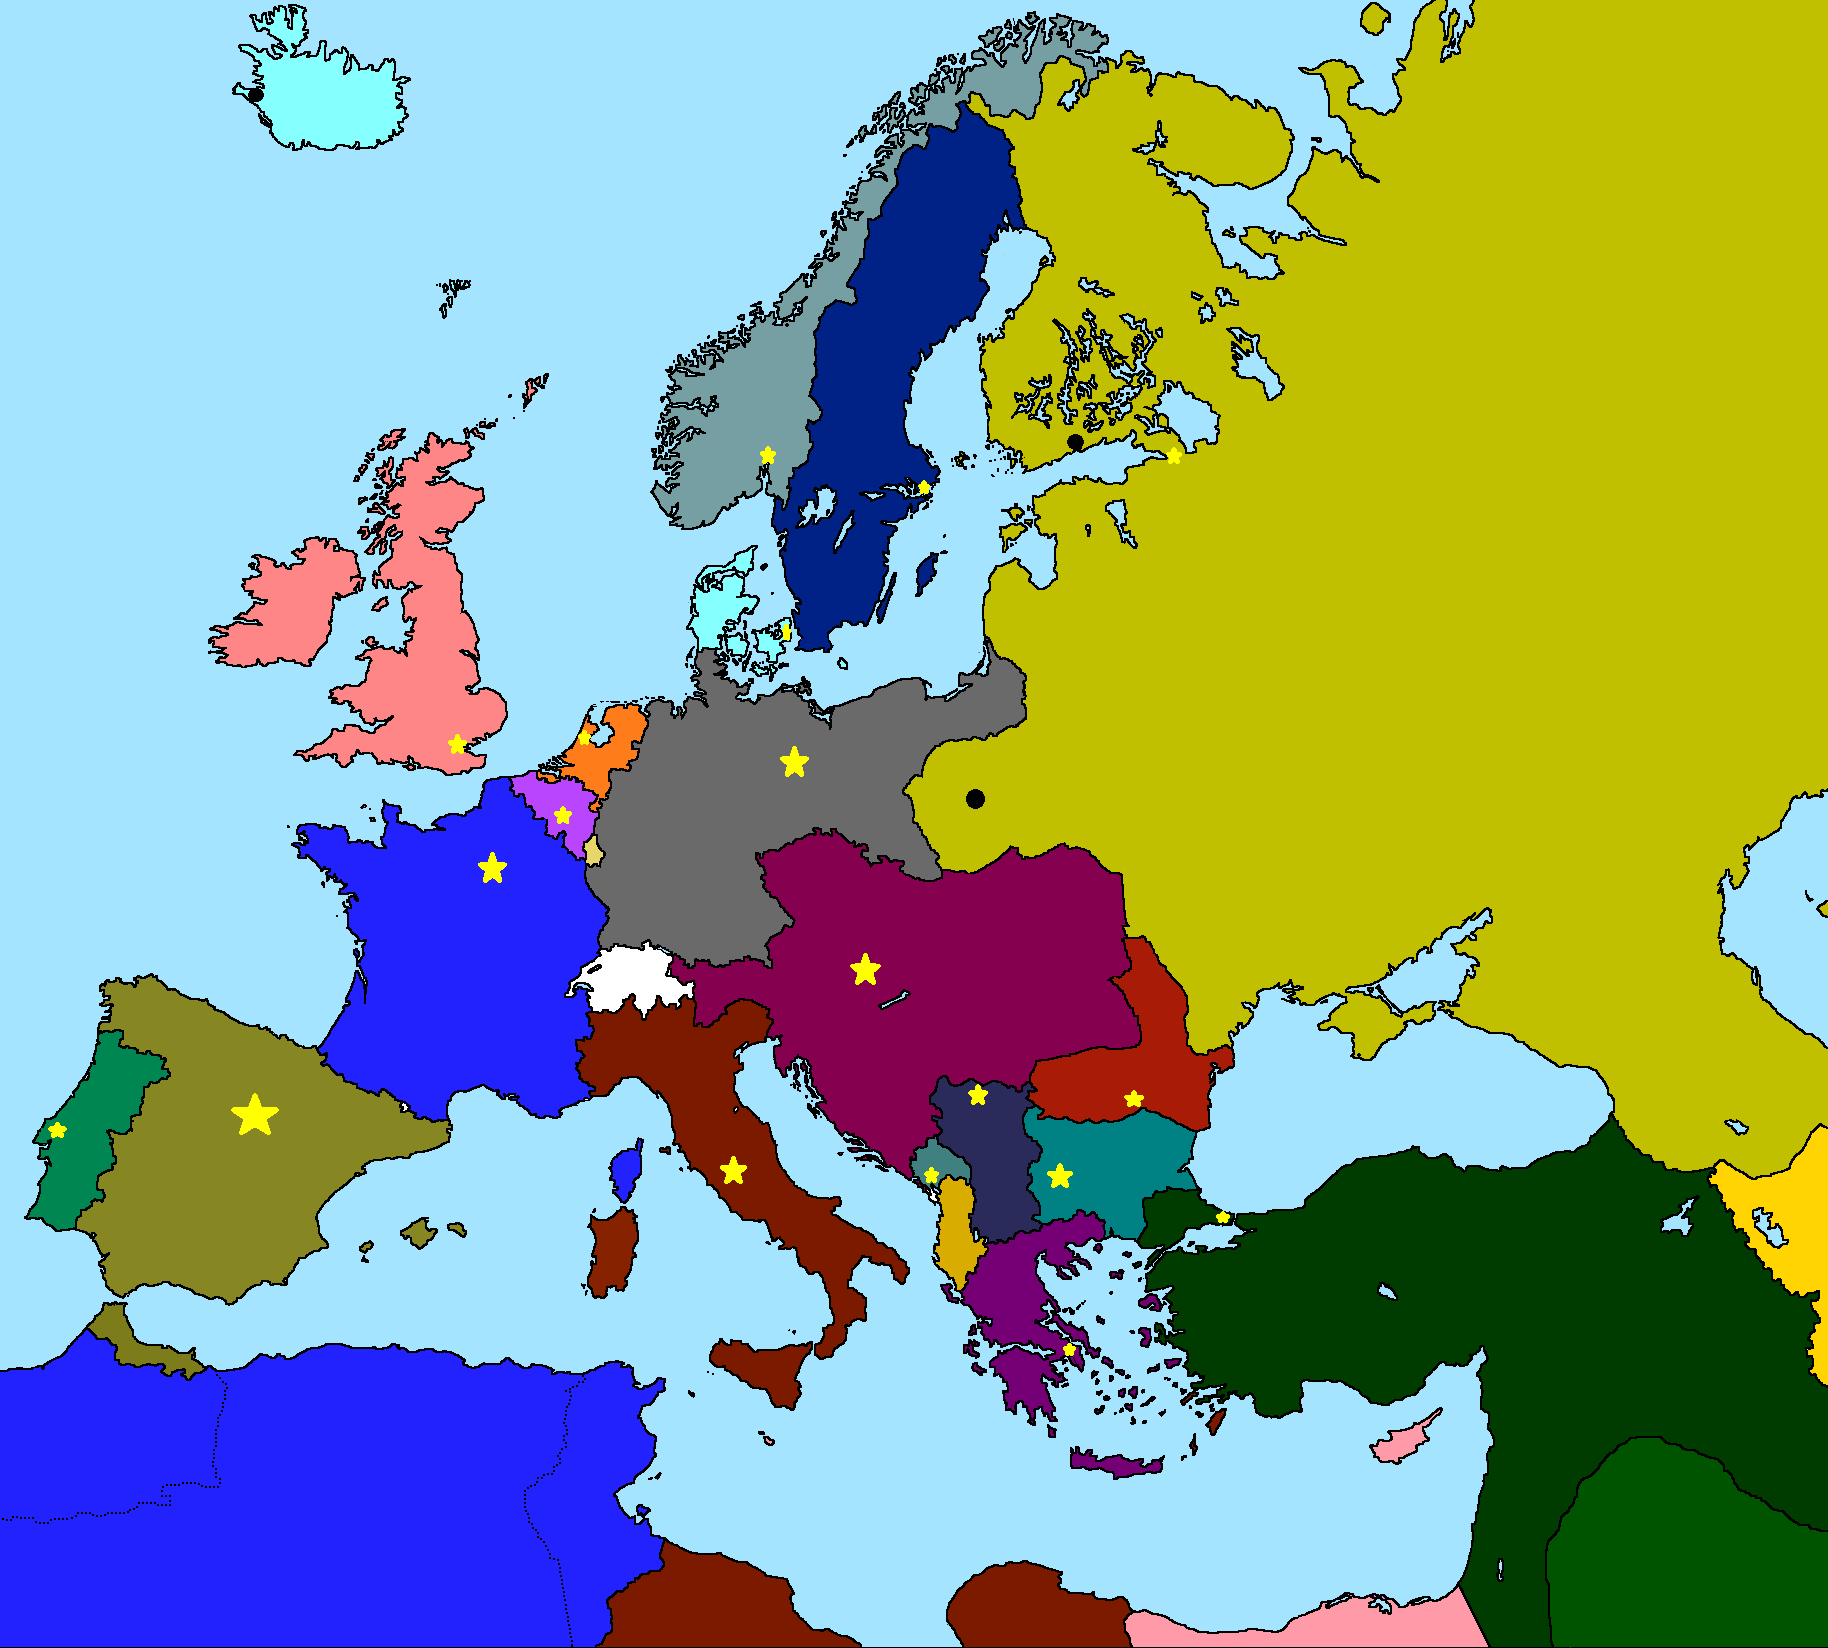 Image Ww1 Colored Map With Capitalspng Thefutureofeuropes Wiki